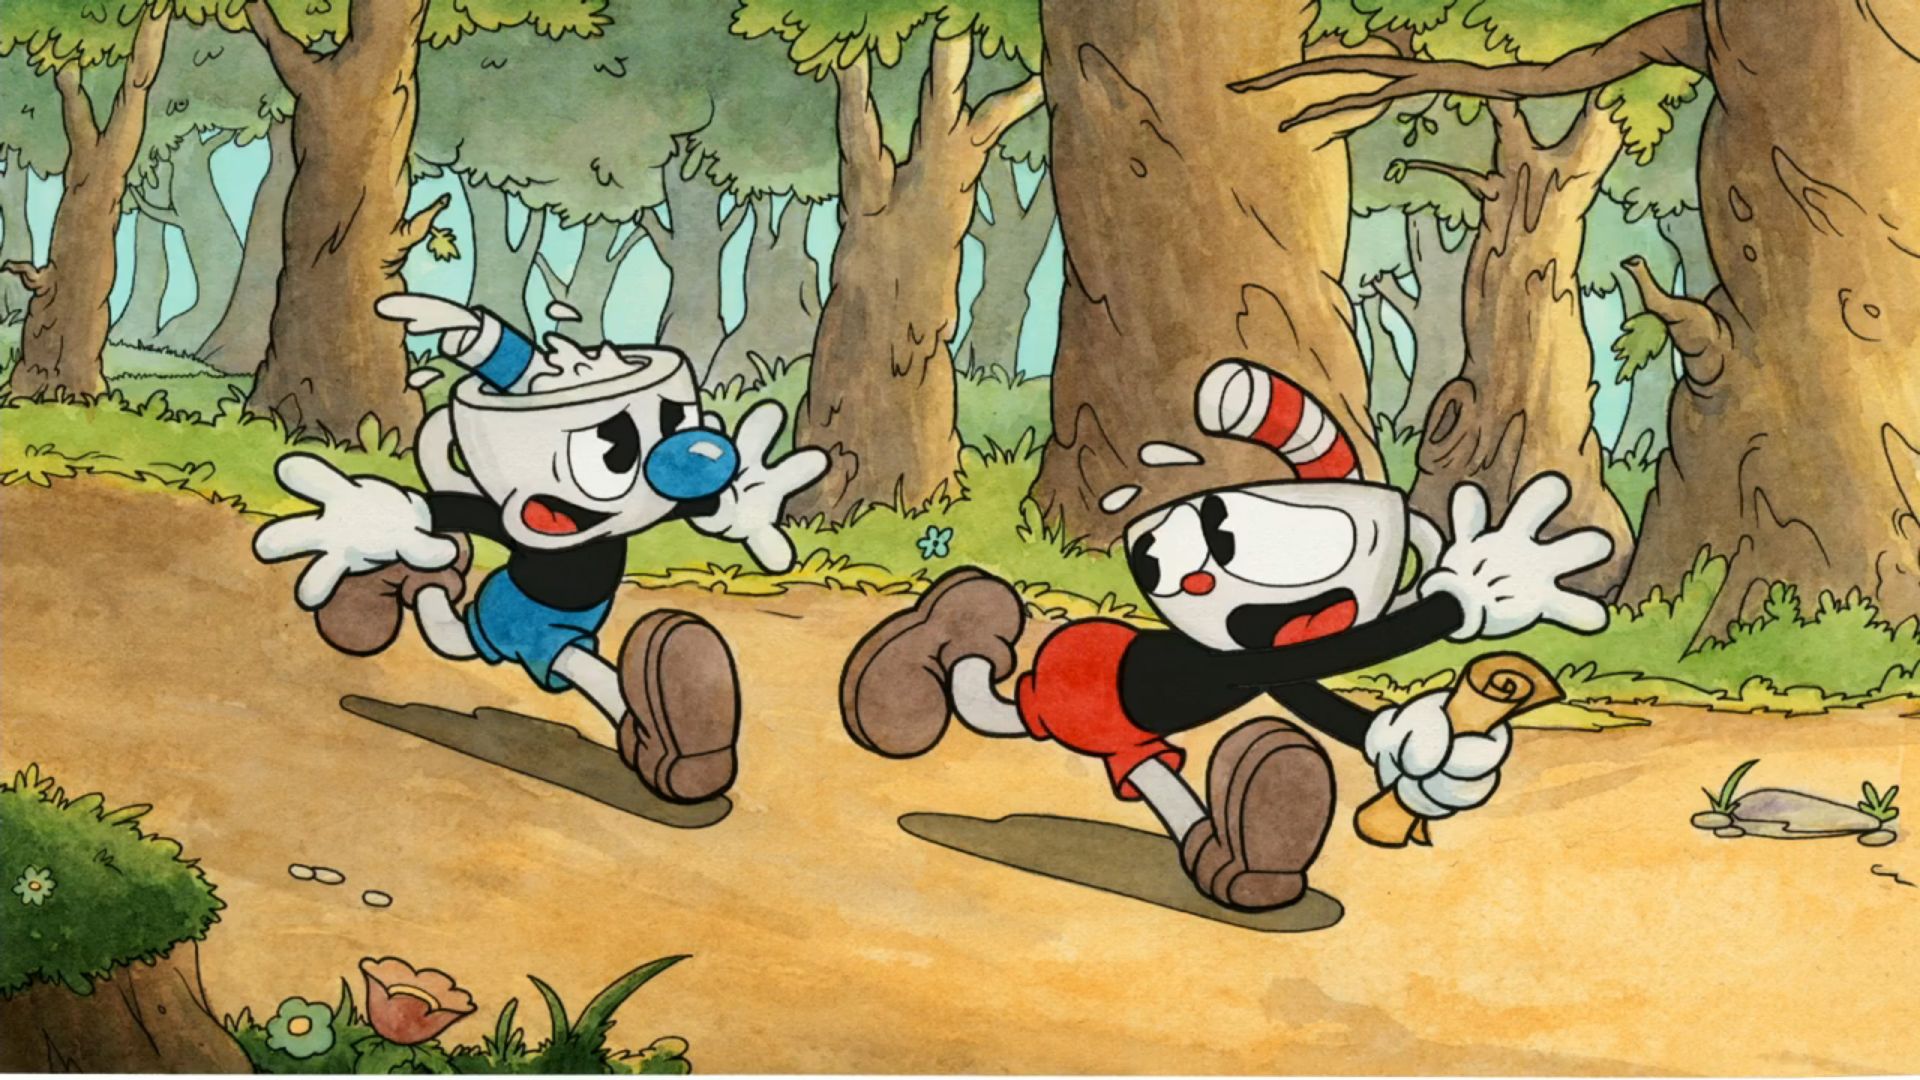 Cuphead Full HD Wallpaper And Background Id